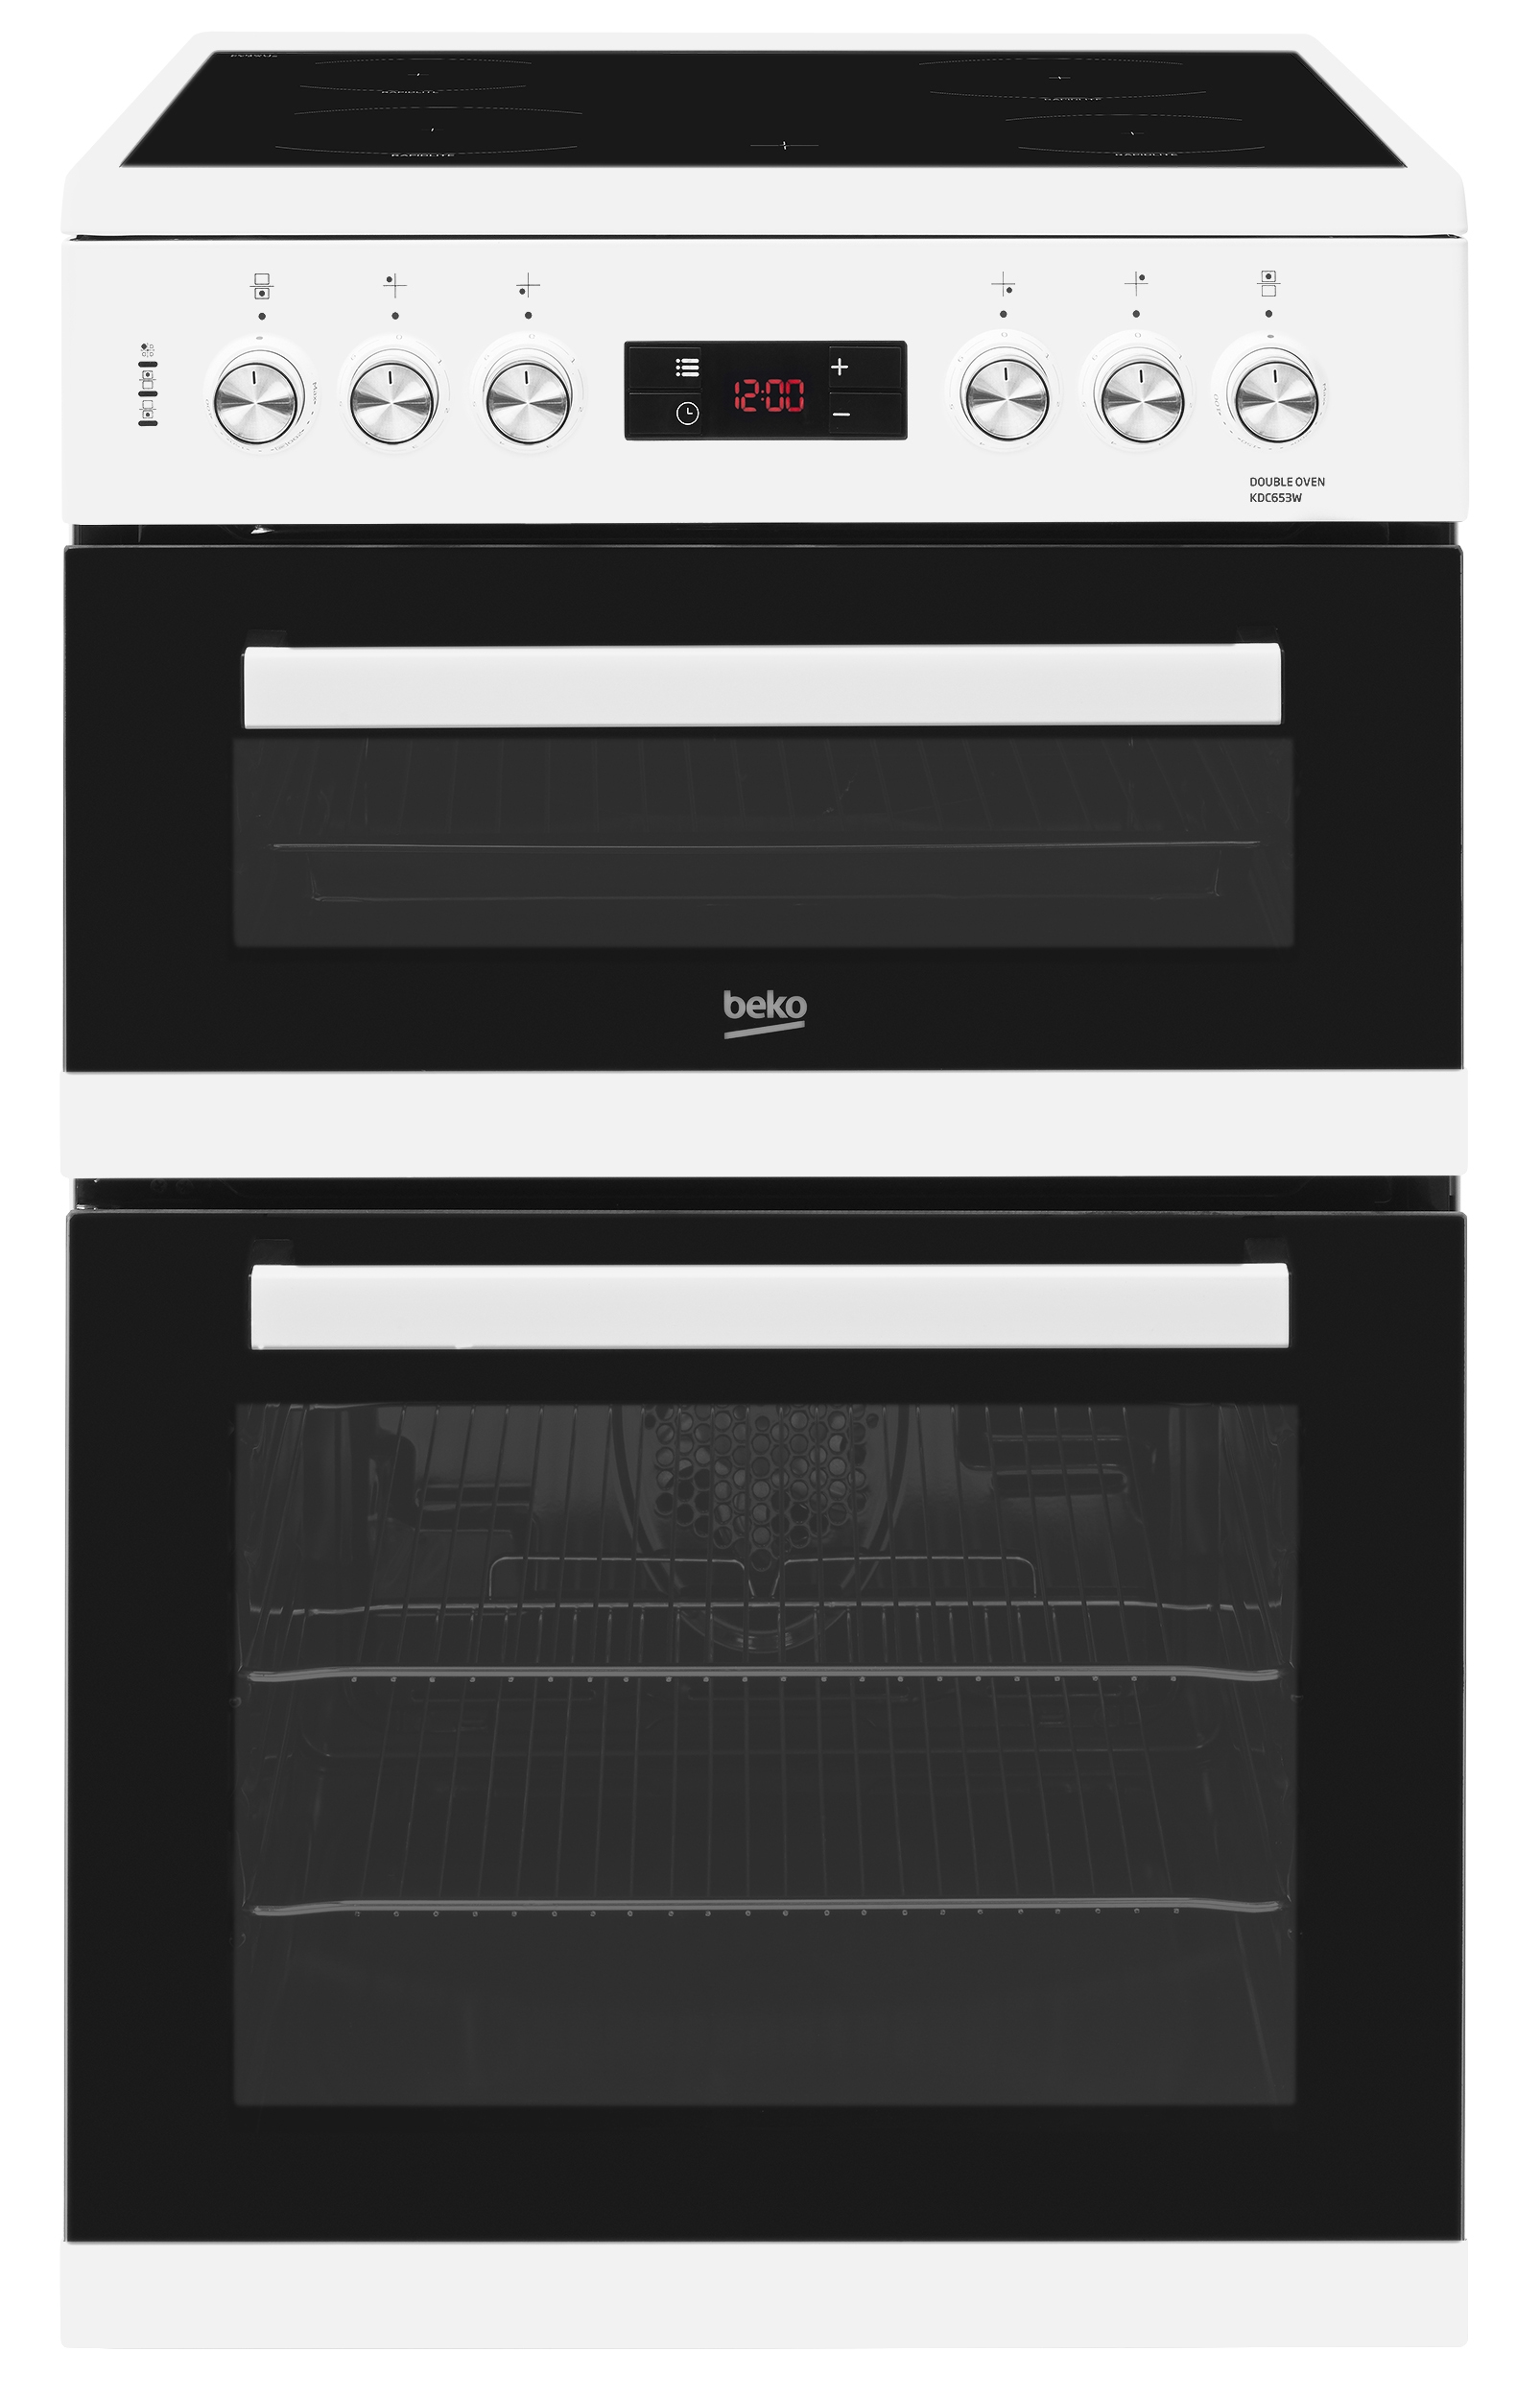 Beko KDC653W Freestanding 60cm Double Oven Electric Cooker-White